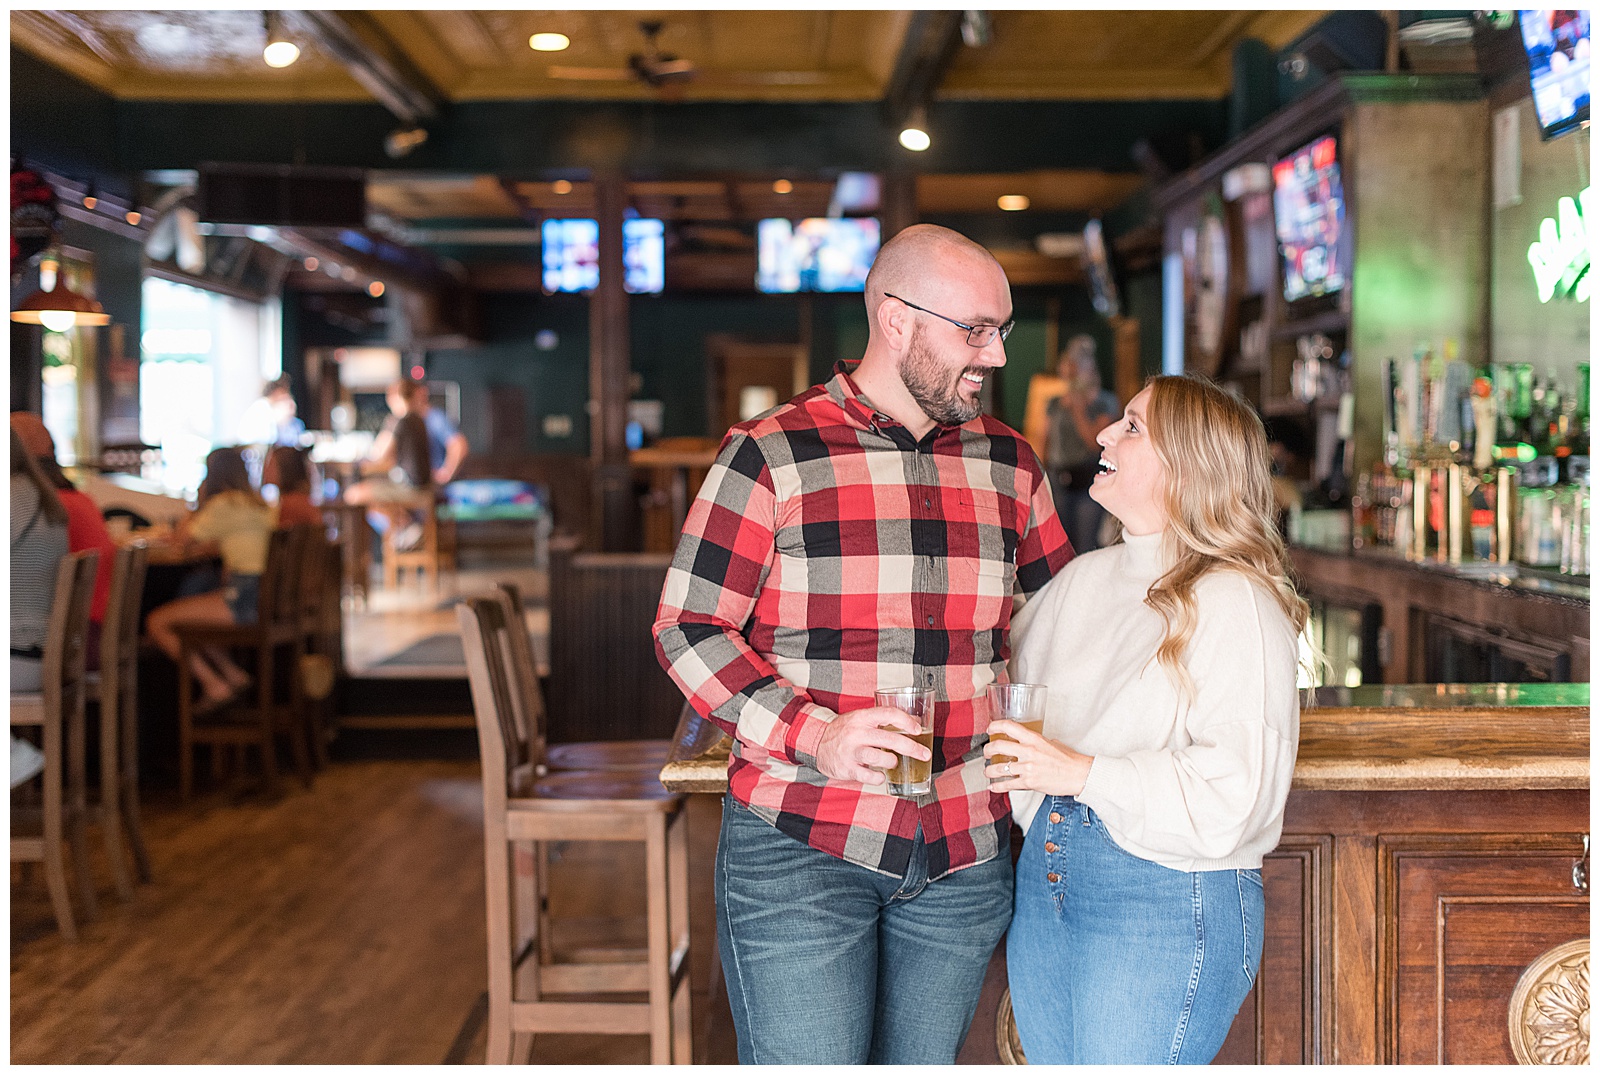 the couple is standing and leaning against the bar counter while holding their drinks and looking at each other and smiling with the guy on the left and the girl on the right and a tall chair is beside the guy in downtown Pittsburgh